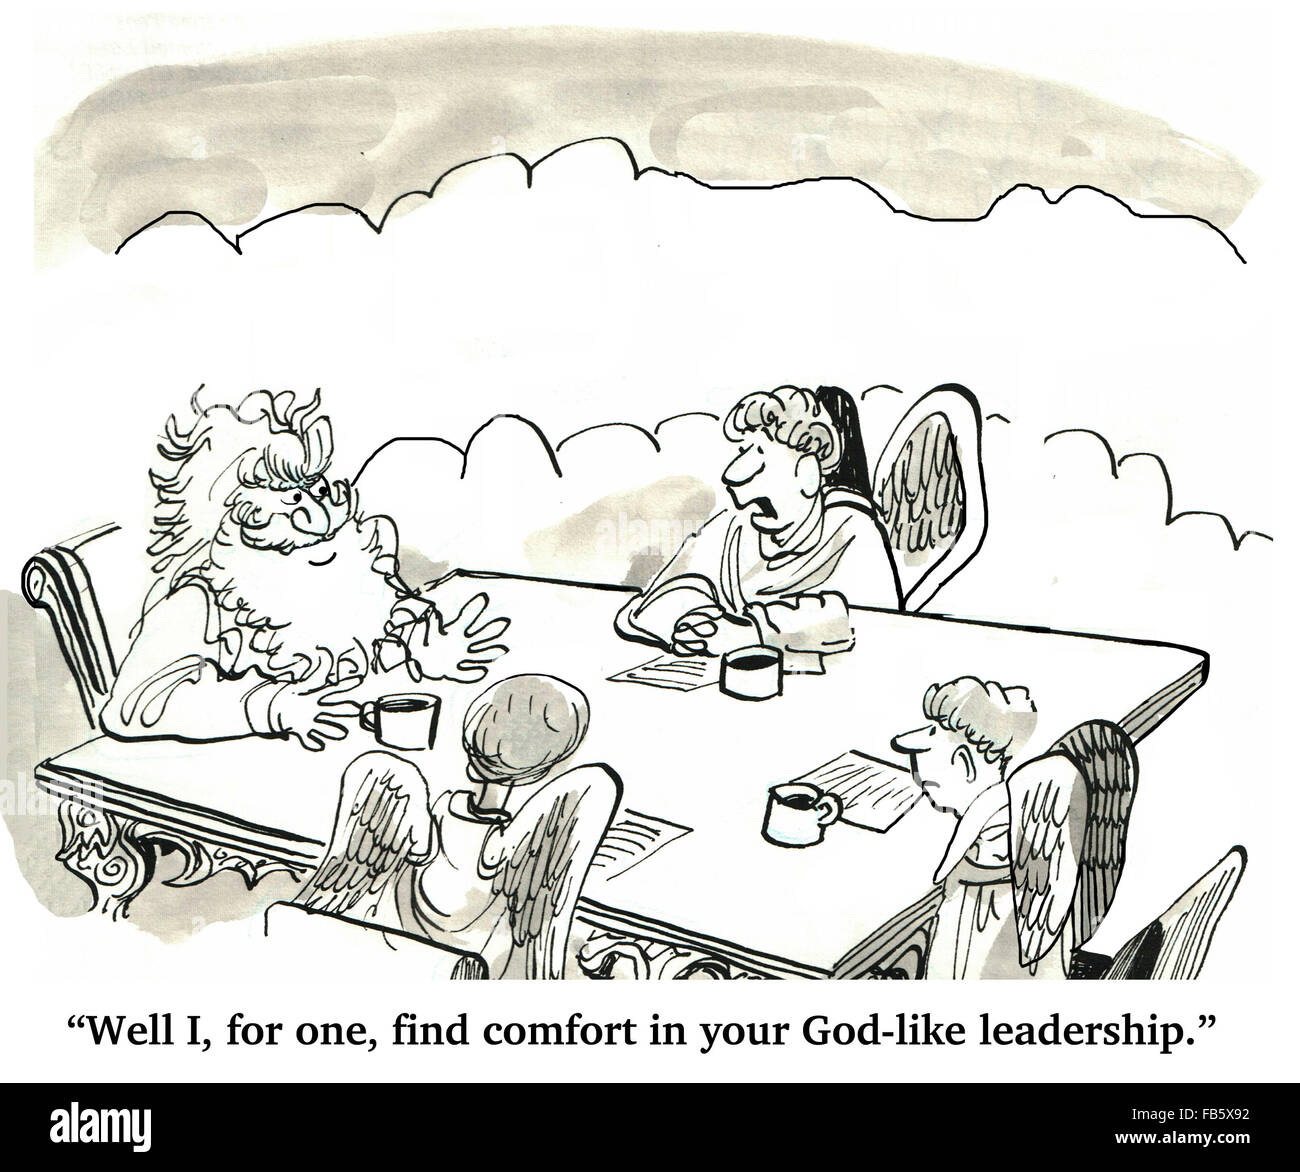 Business cartoon about leadership. The manager finds comfort in the businessman's God-like leadership. Stock Photo